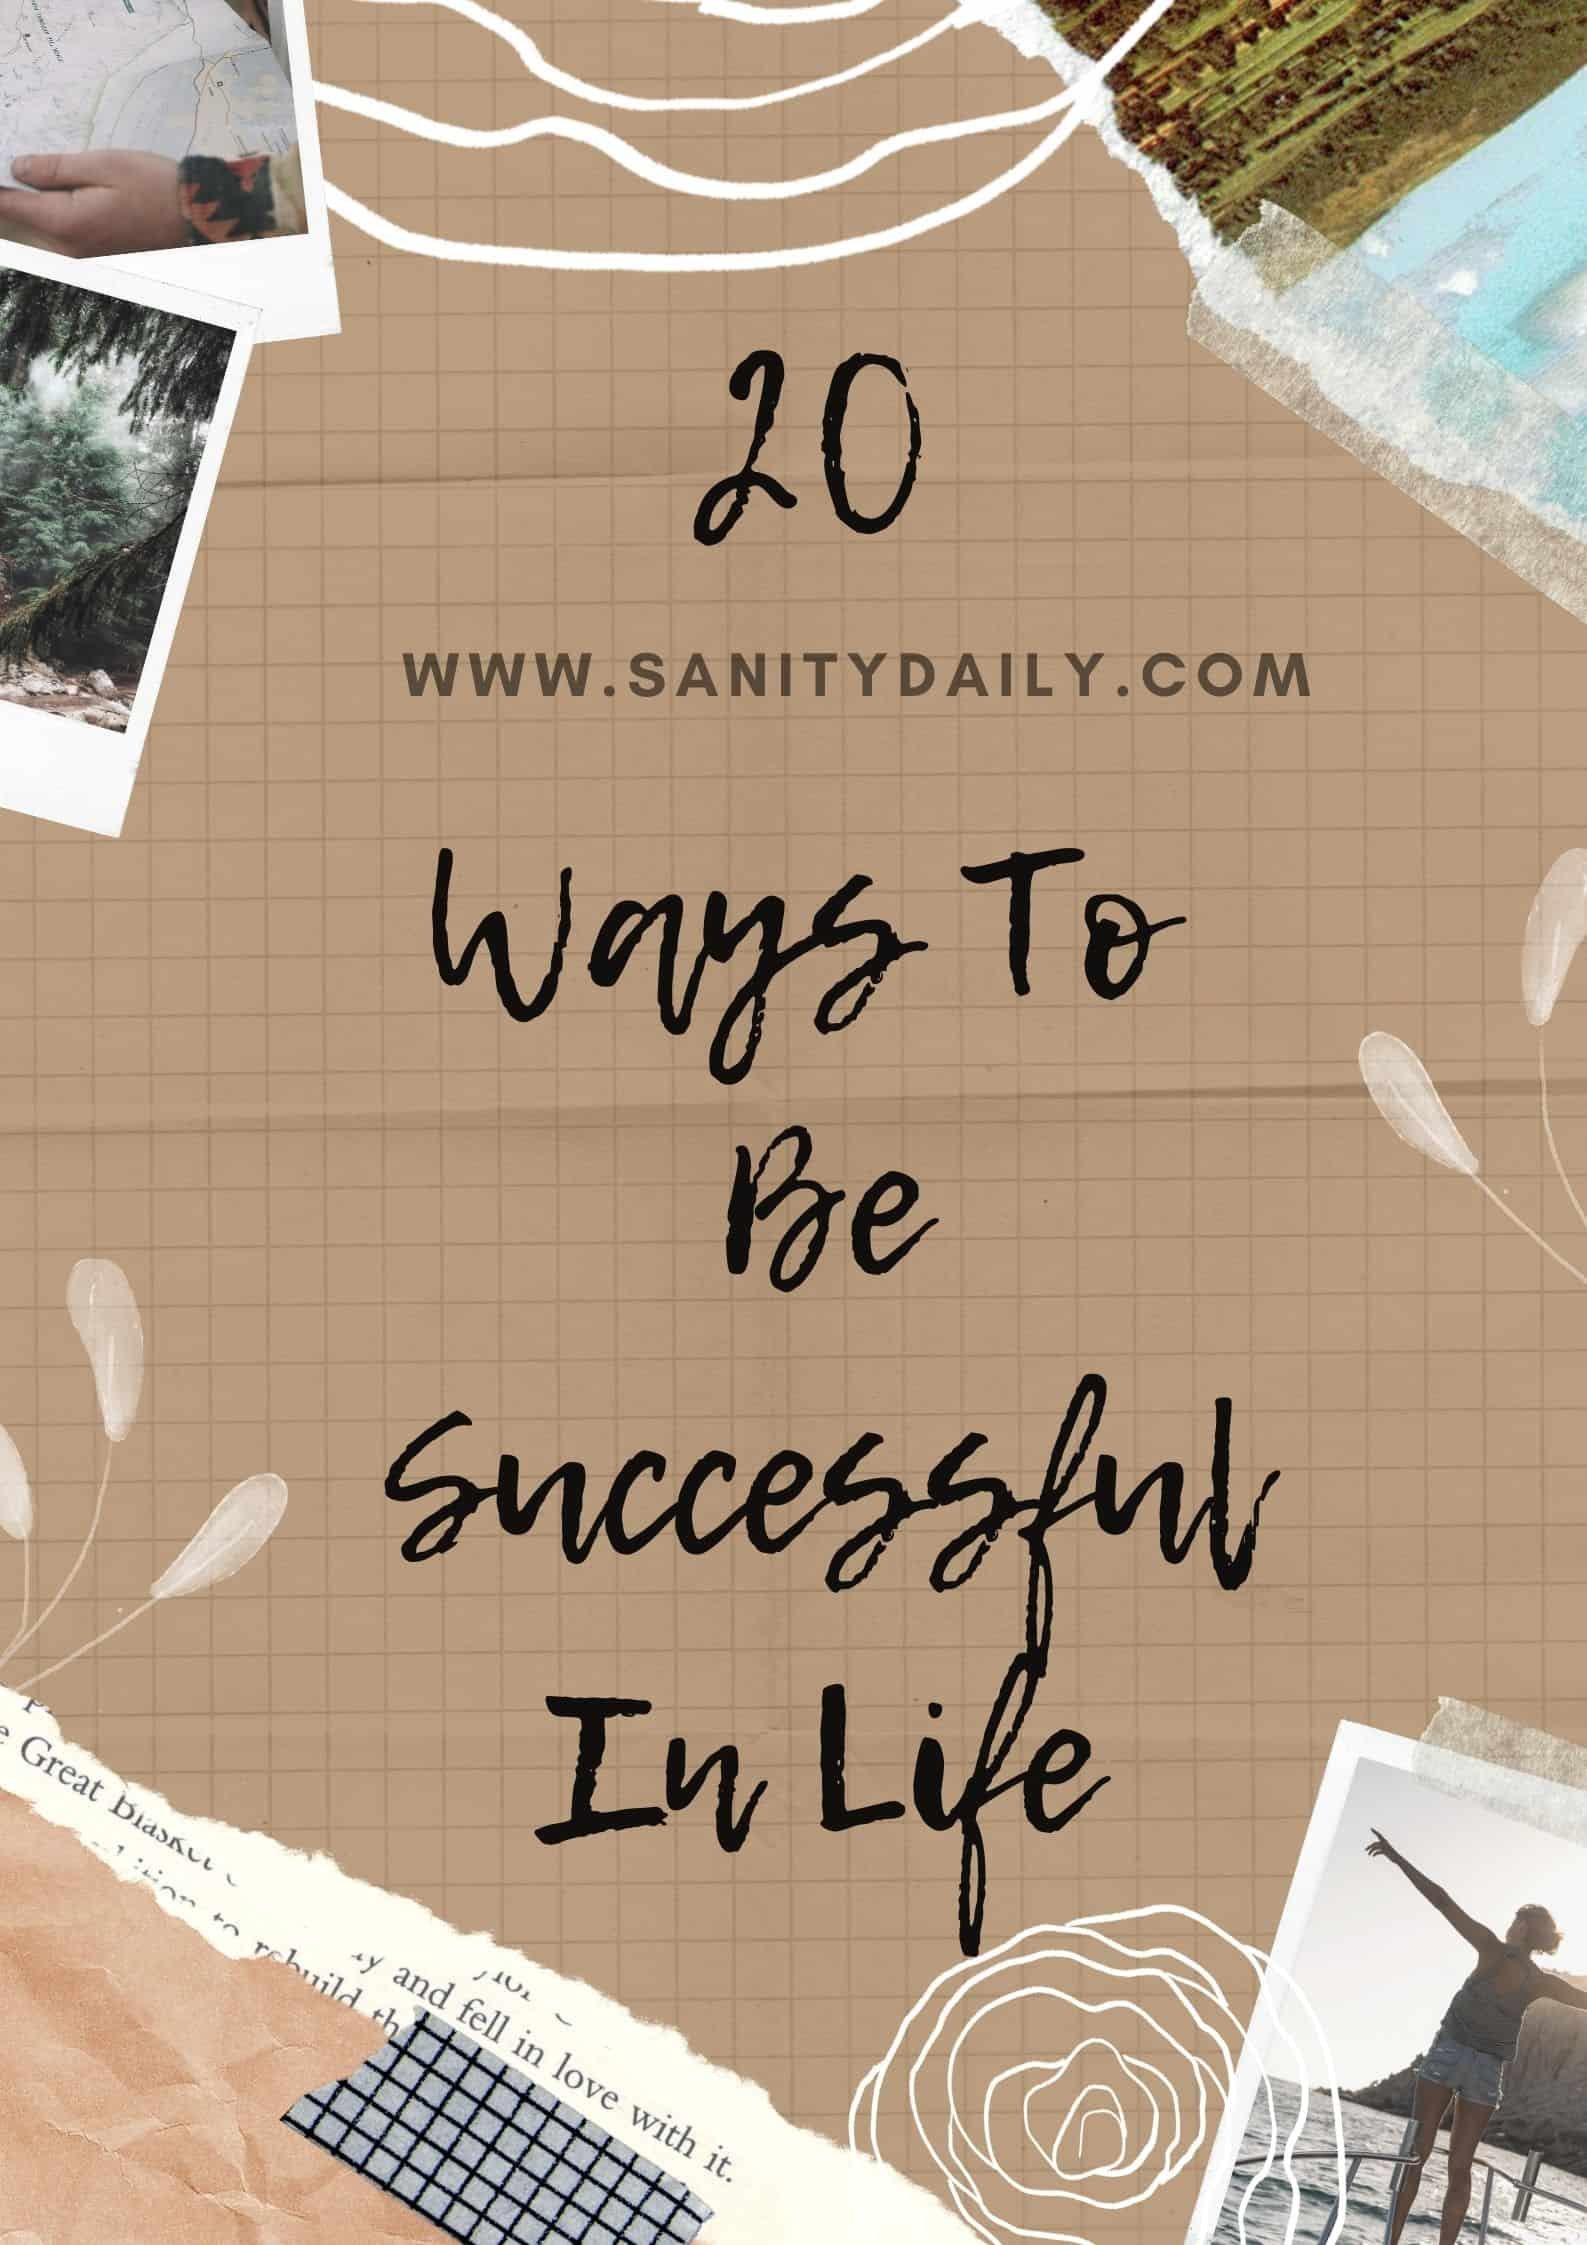 How to become successful in life?